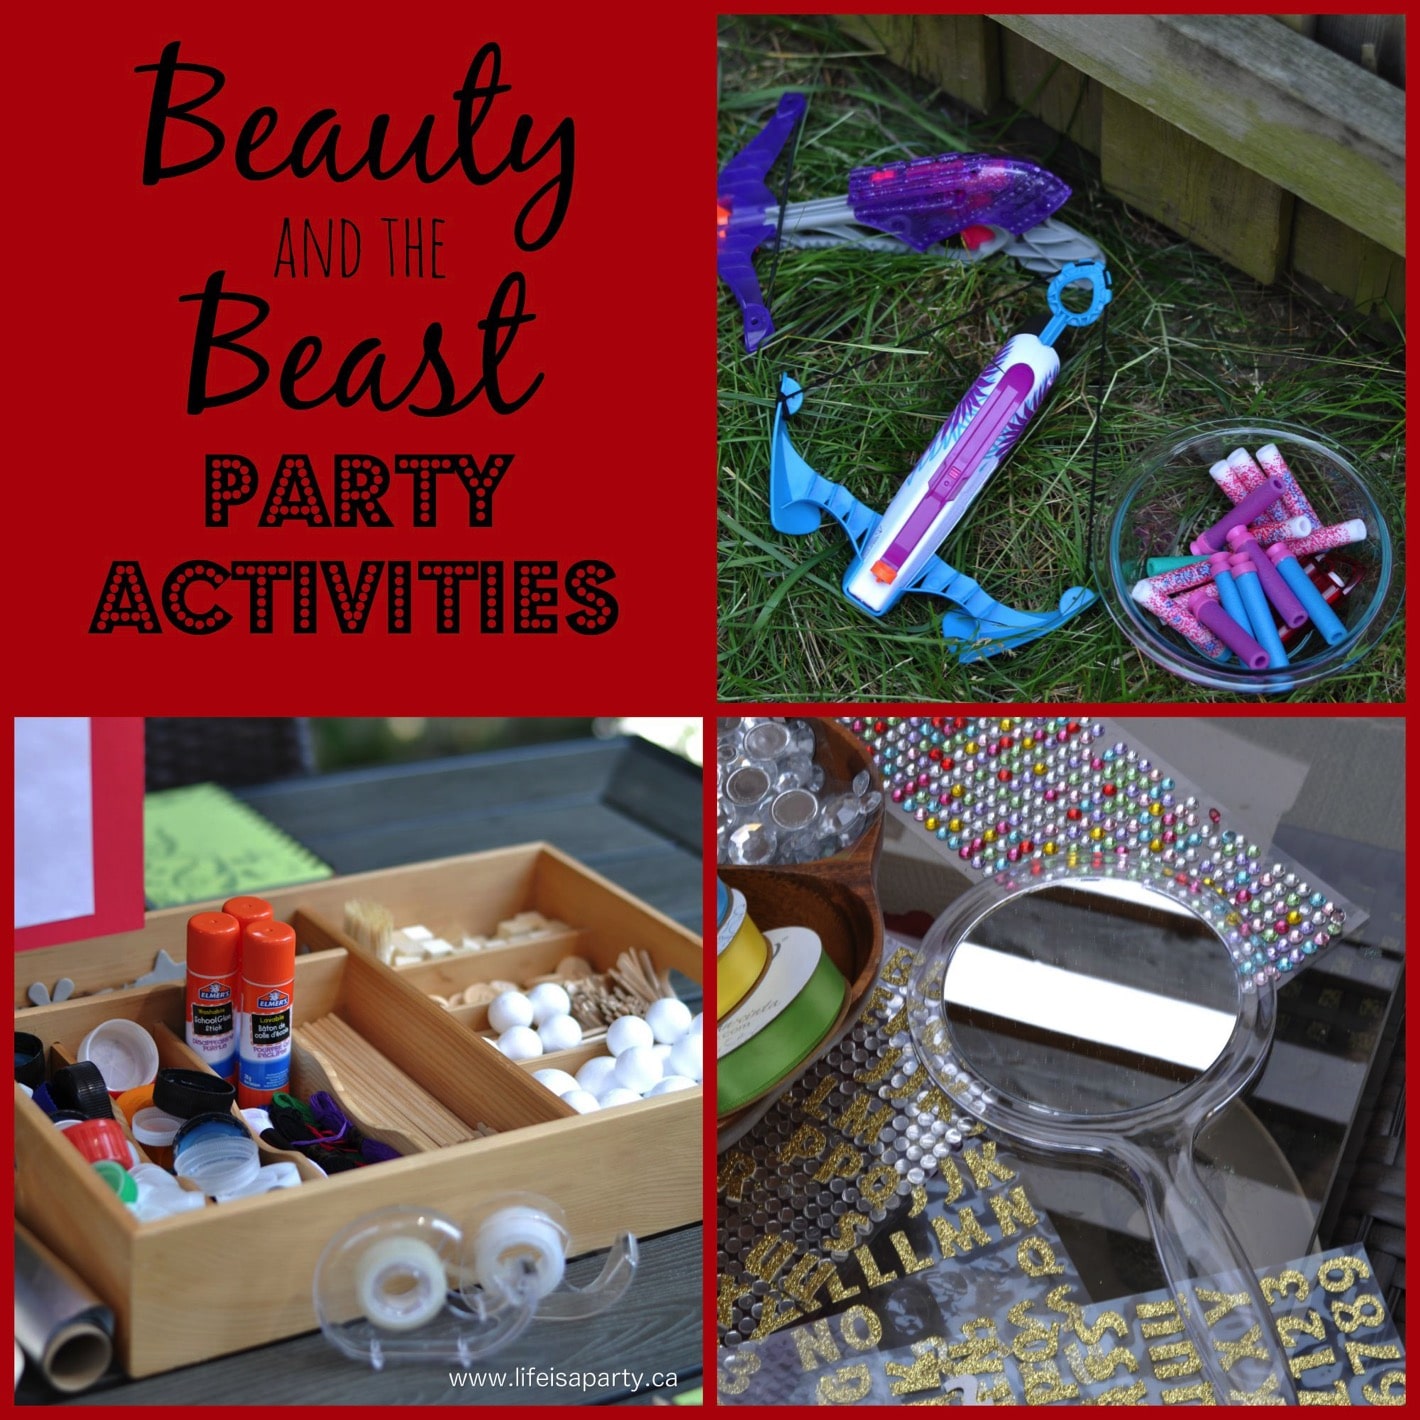 beauty-and-the-beast-party-activities-1.1.jpg